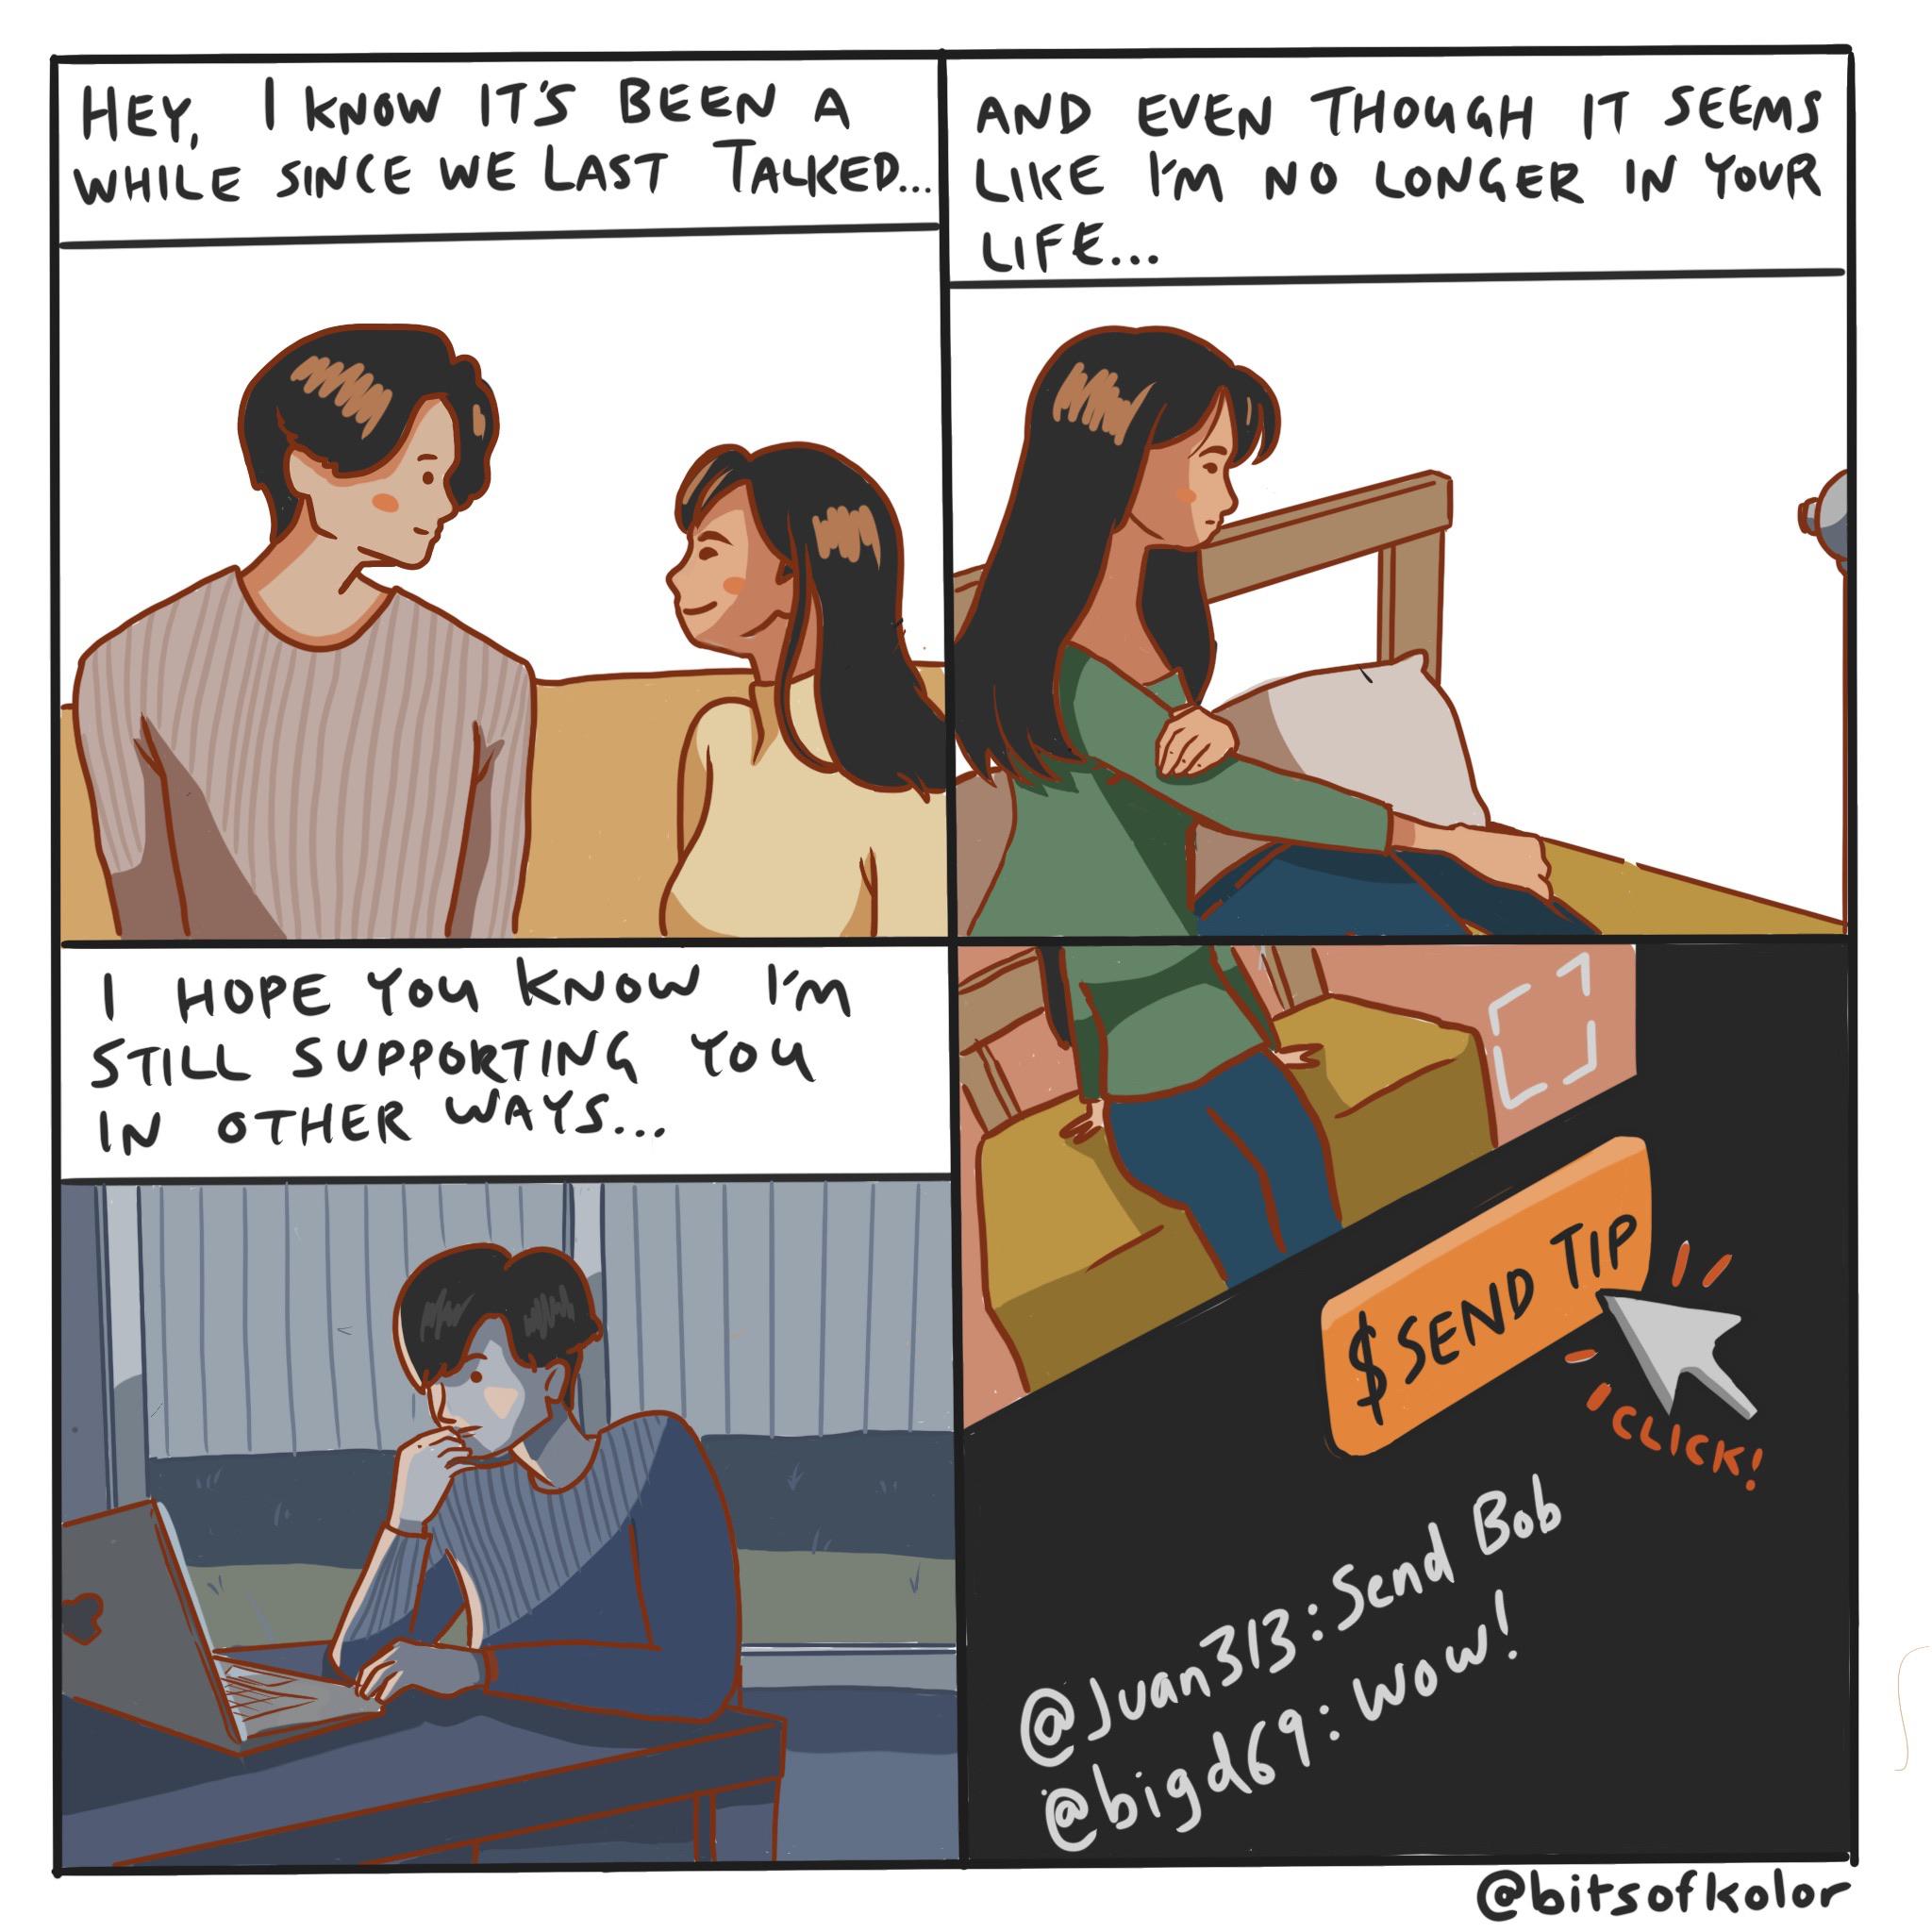  still think about you (from bitsofkolor),  Comics  still think about you (from bitsofkolor),  text: HEY, 1 IT's A WHILE strJ(e WE LAST TALKED... I HOPE I'm Situ.- OTHER WAYS... ArJD TH0(44H s€cms NO CotJ(ER W YovR Lift... $13 t 